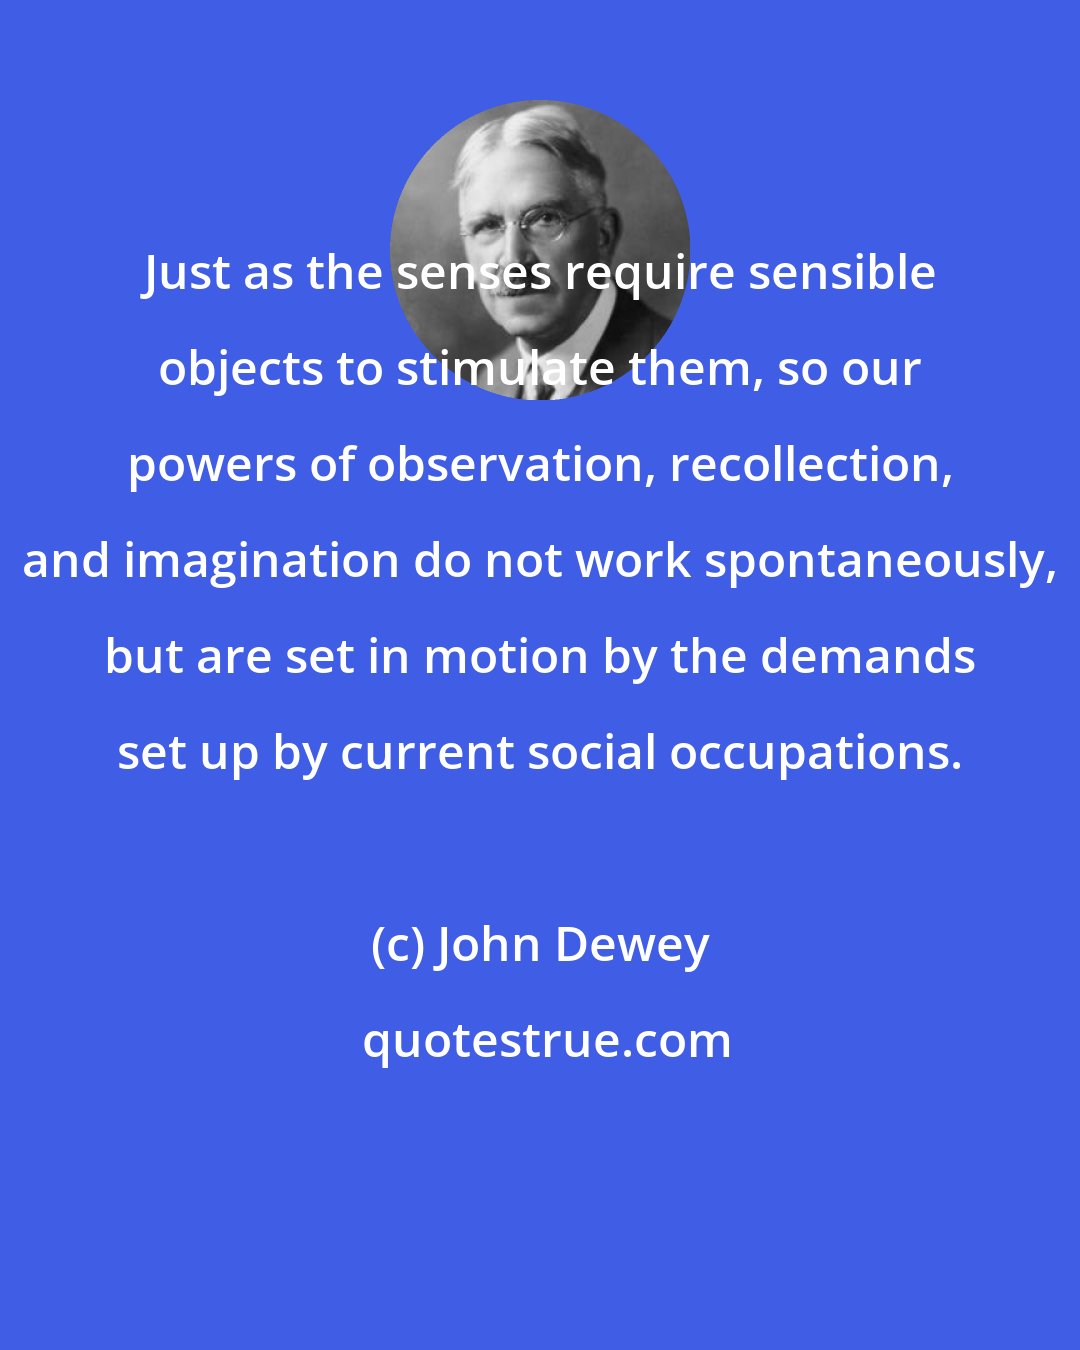 John Dewey: Just as the senses require sensible objects to stimulate them, so our powers of observation, recollection, and imagination do not work spontaneously, but are set in motion by the demands set up by current social occupations.